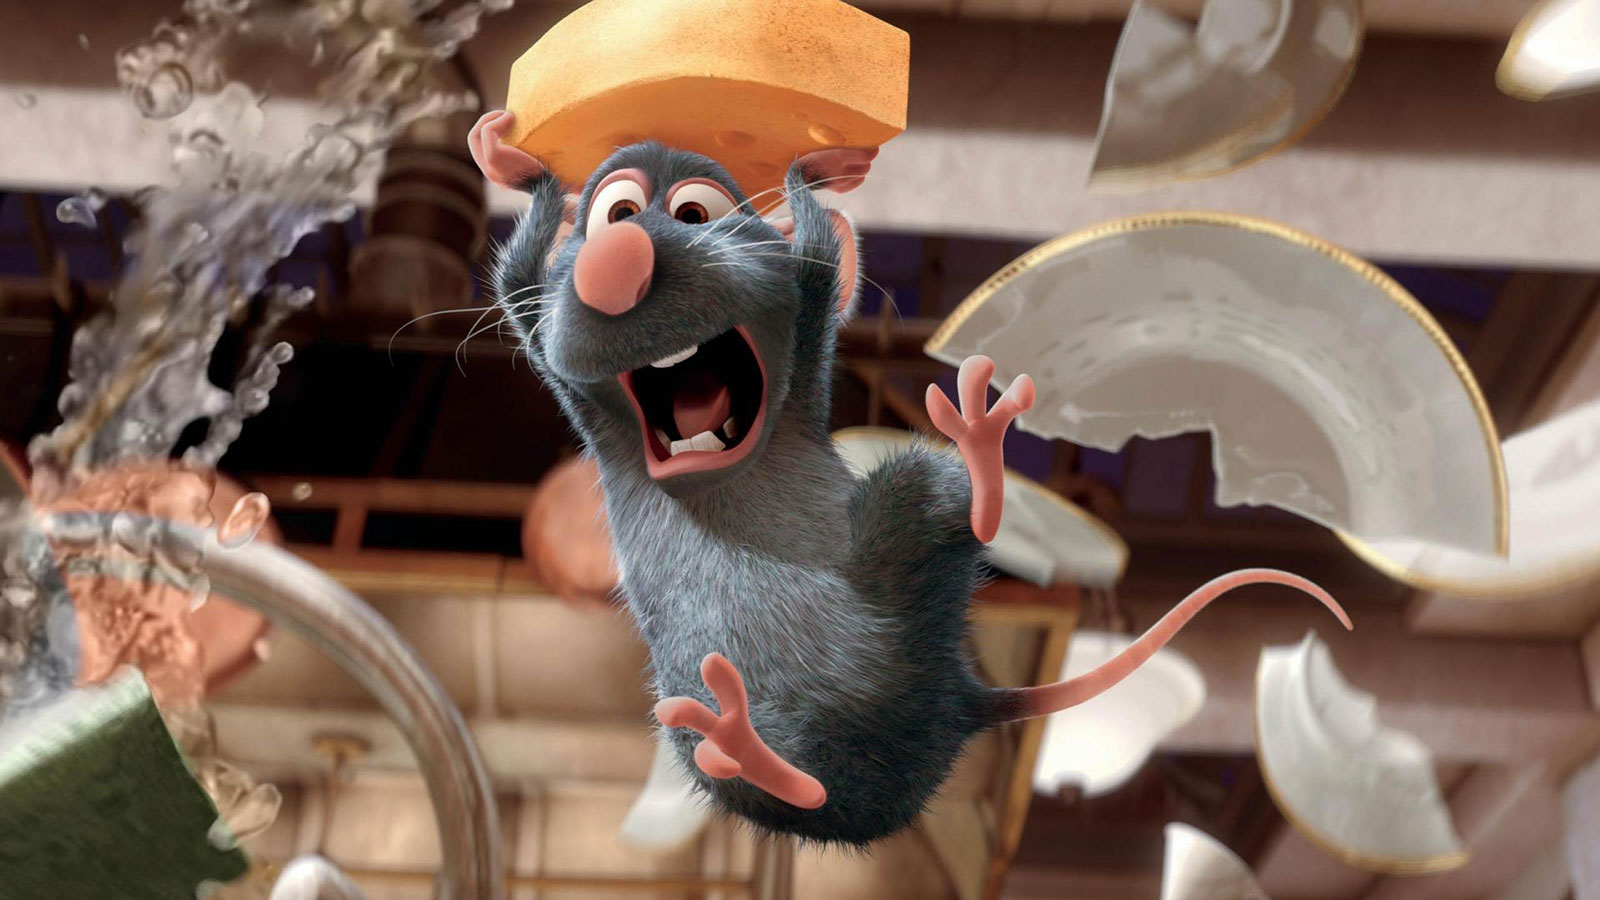 I Bet You Can’t Identify More Than 10/15 of These Pixar Movie Foods Ratatouille Remy